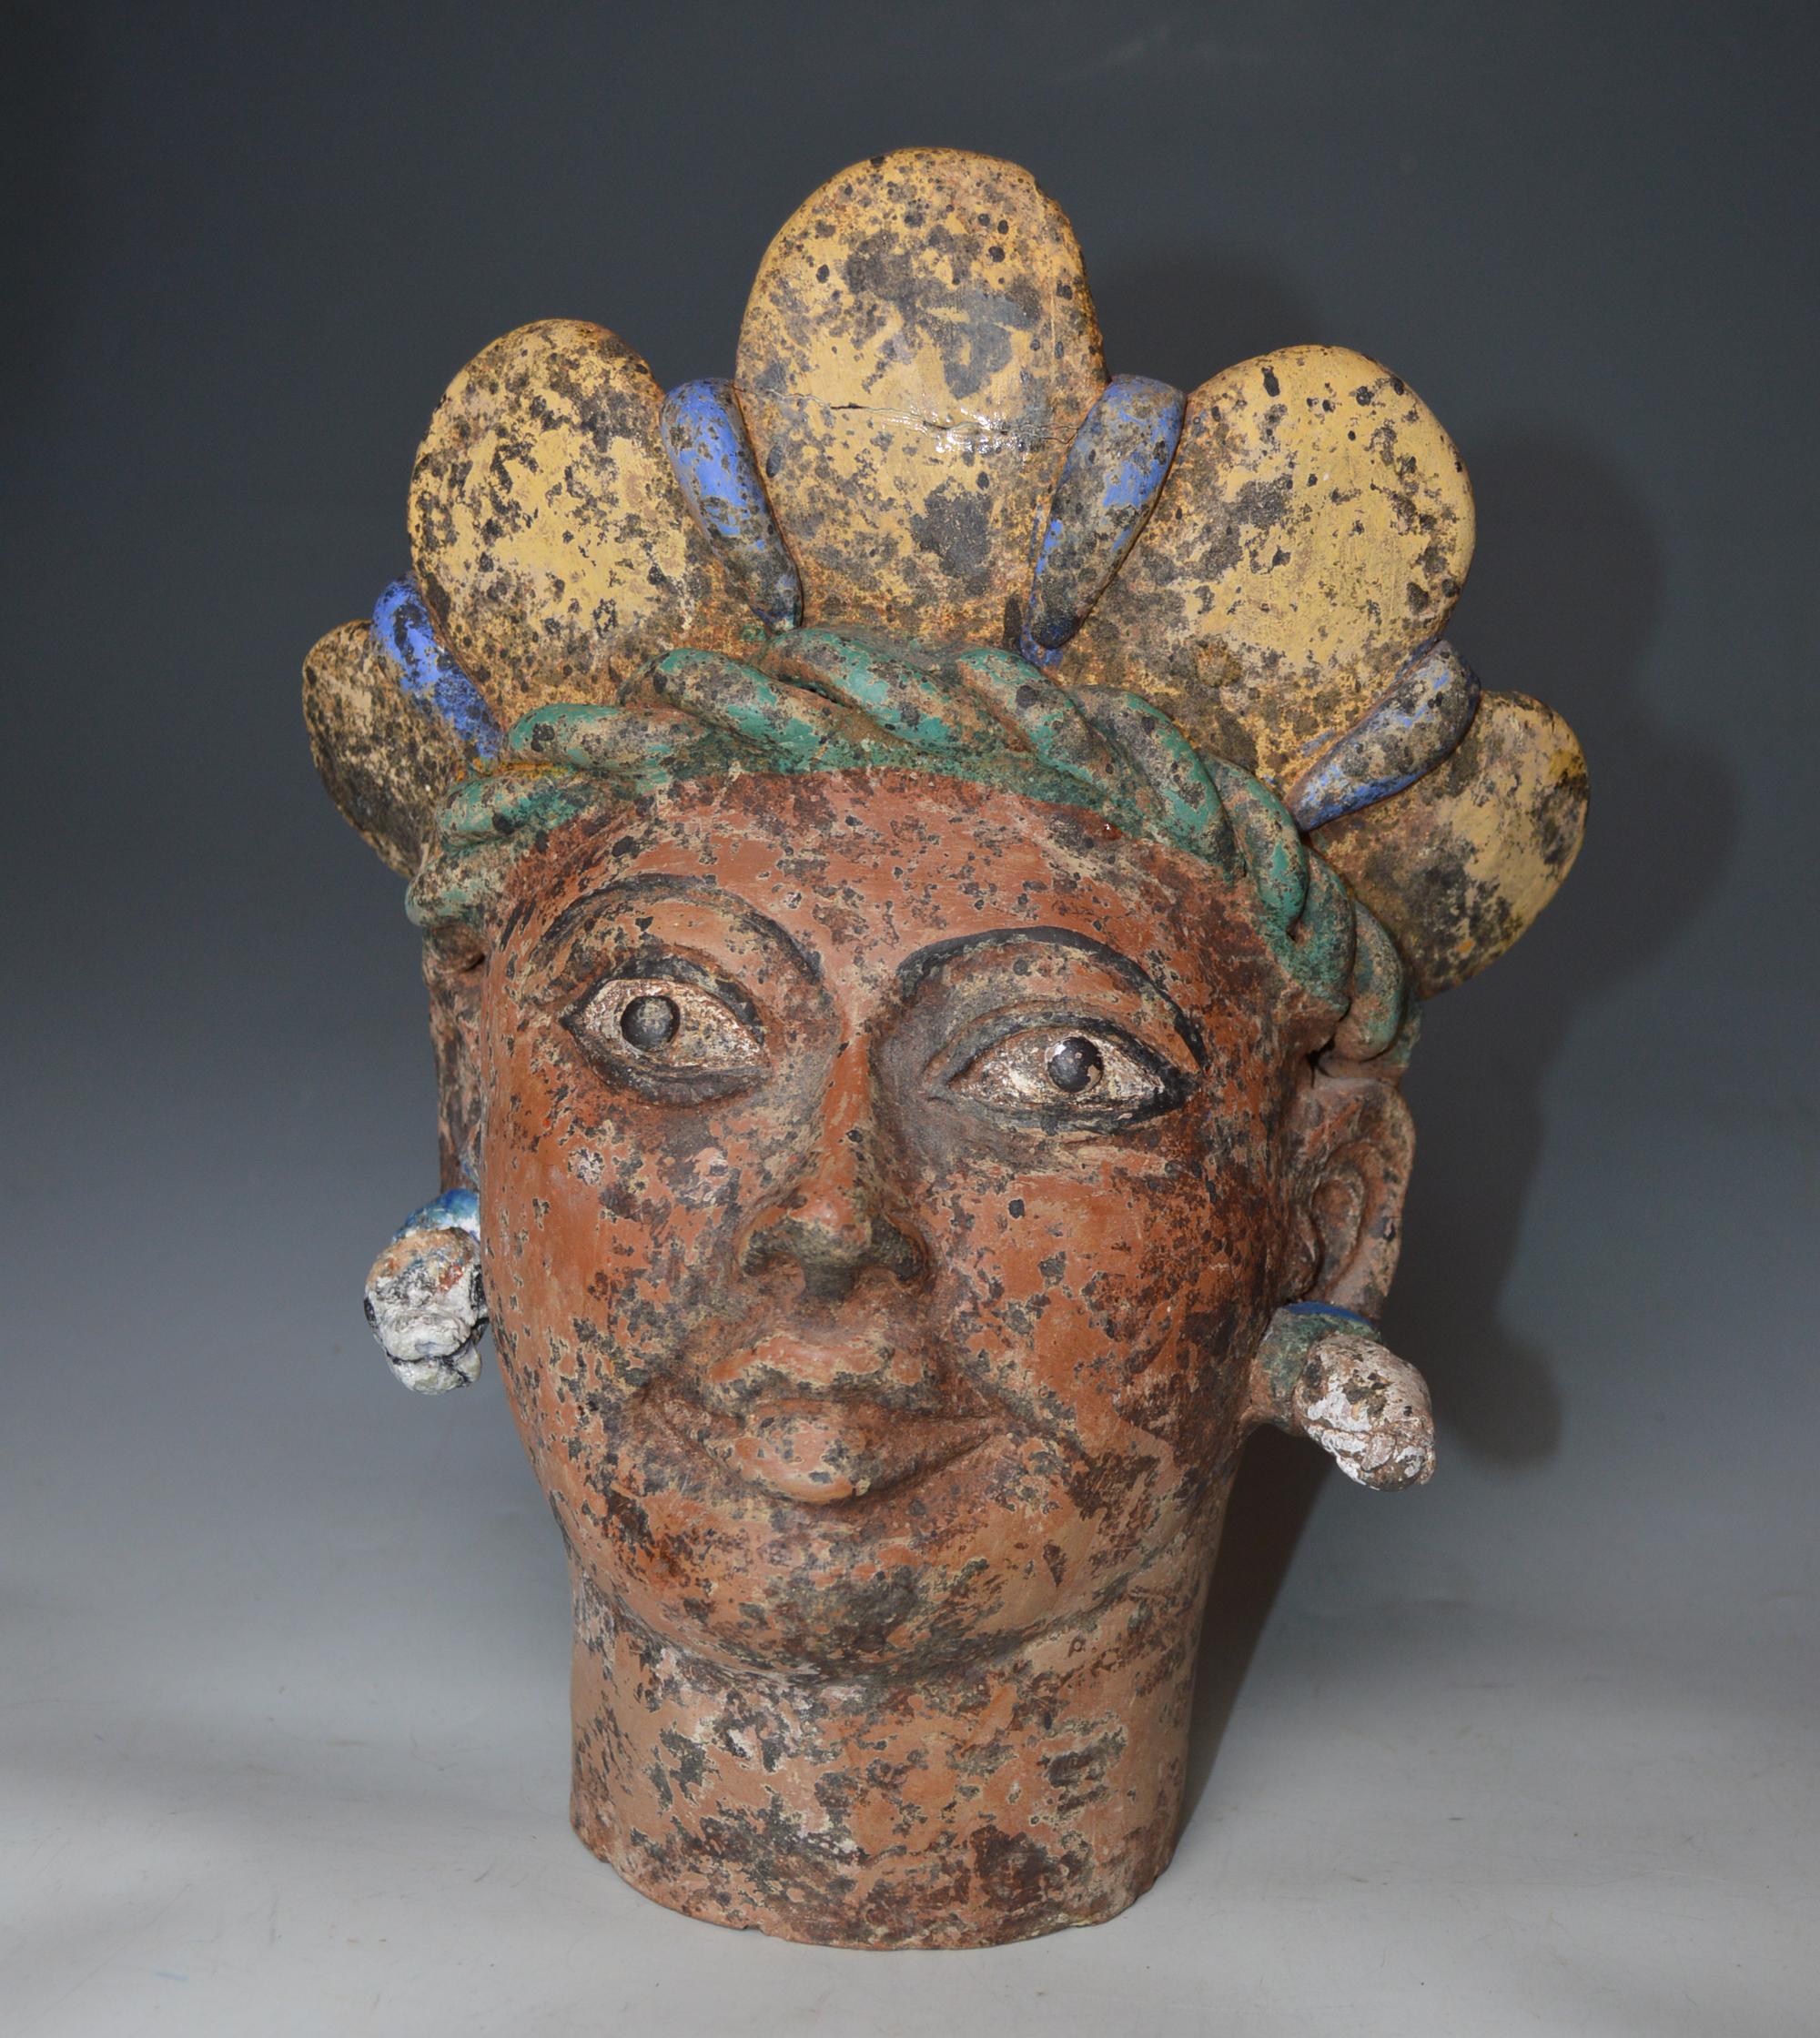 Large Vintage decorative Mexican terracotta bust Montezuma 

A Vintage pottery bust of Montezuma with headdress and ear ornaments  in red/brown terracotta with polychrome pigment decoration. Oaxaca Mexico Circa early 20th century.
Height 11 inches